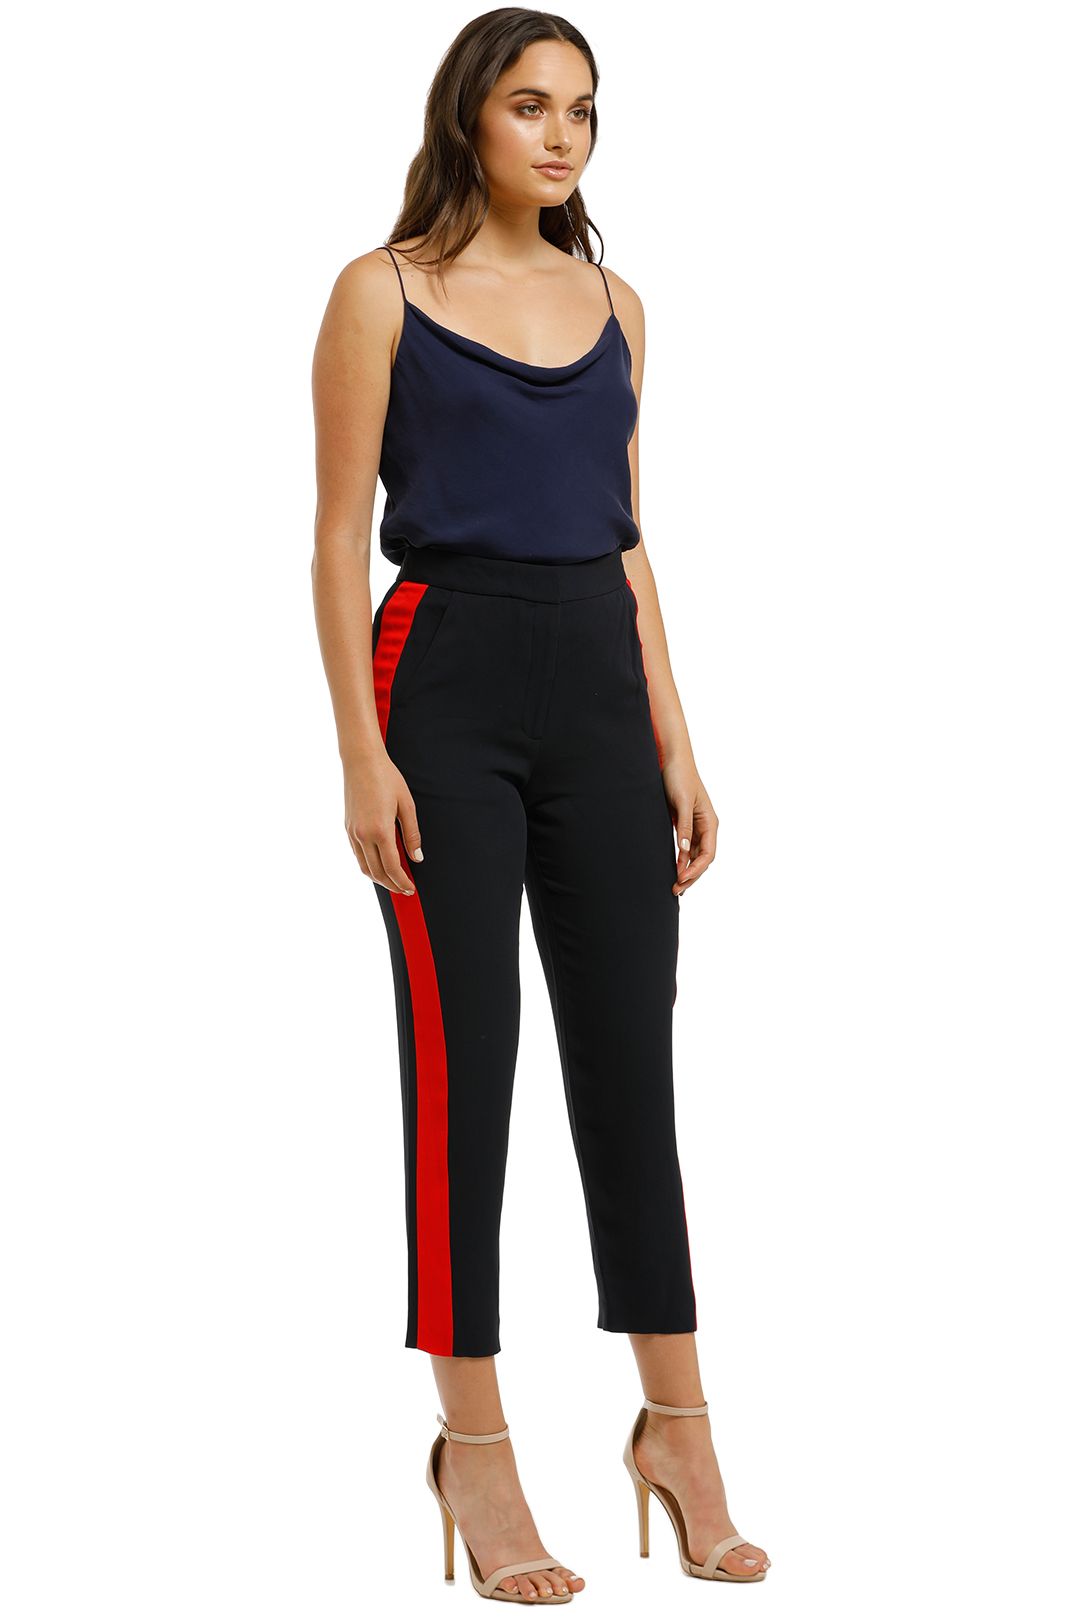 Ginger-and-Smart-Illicit-Pant-Navy-Red-Apple-Side